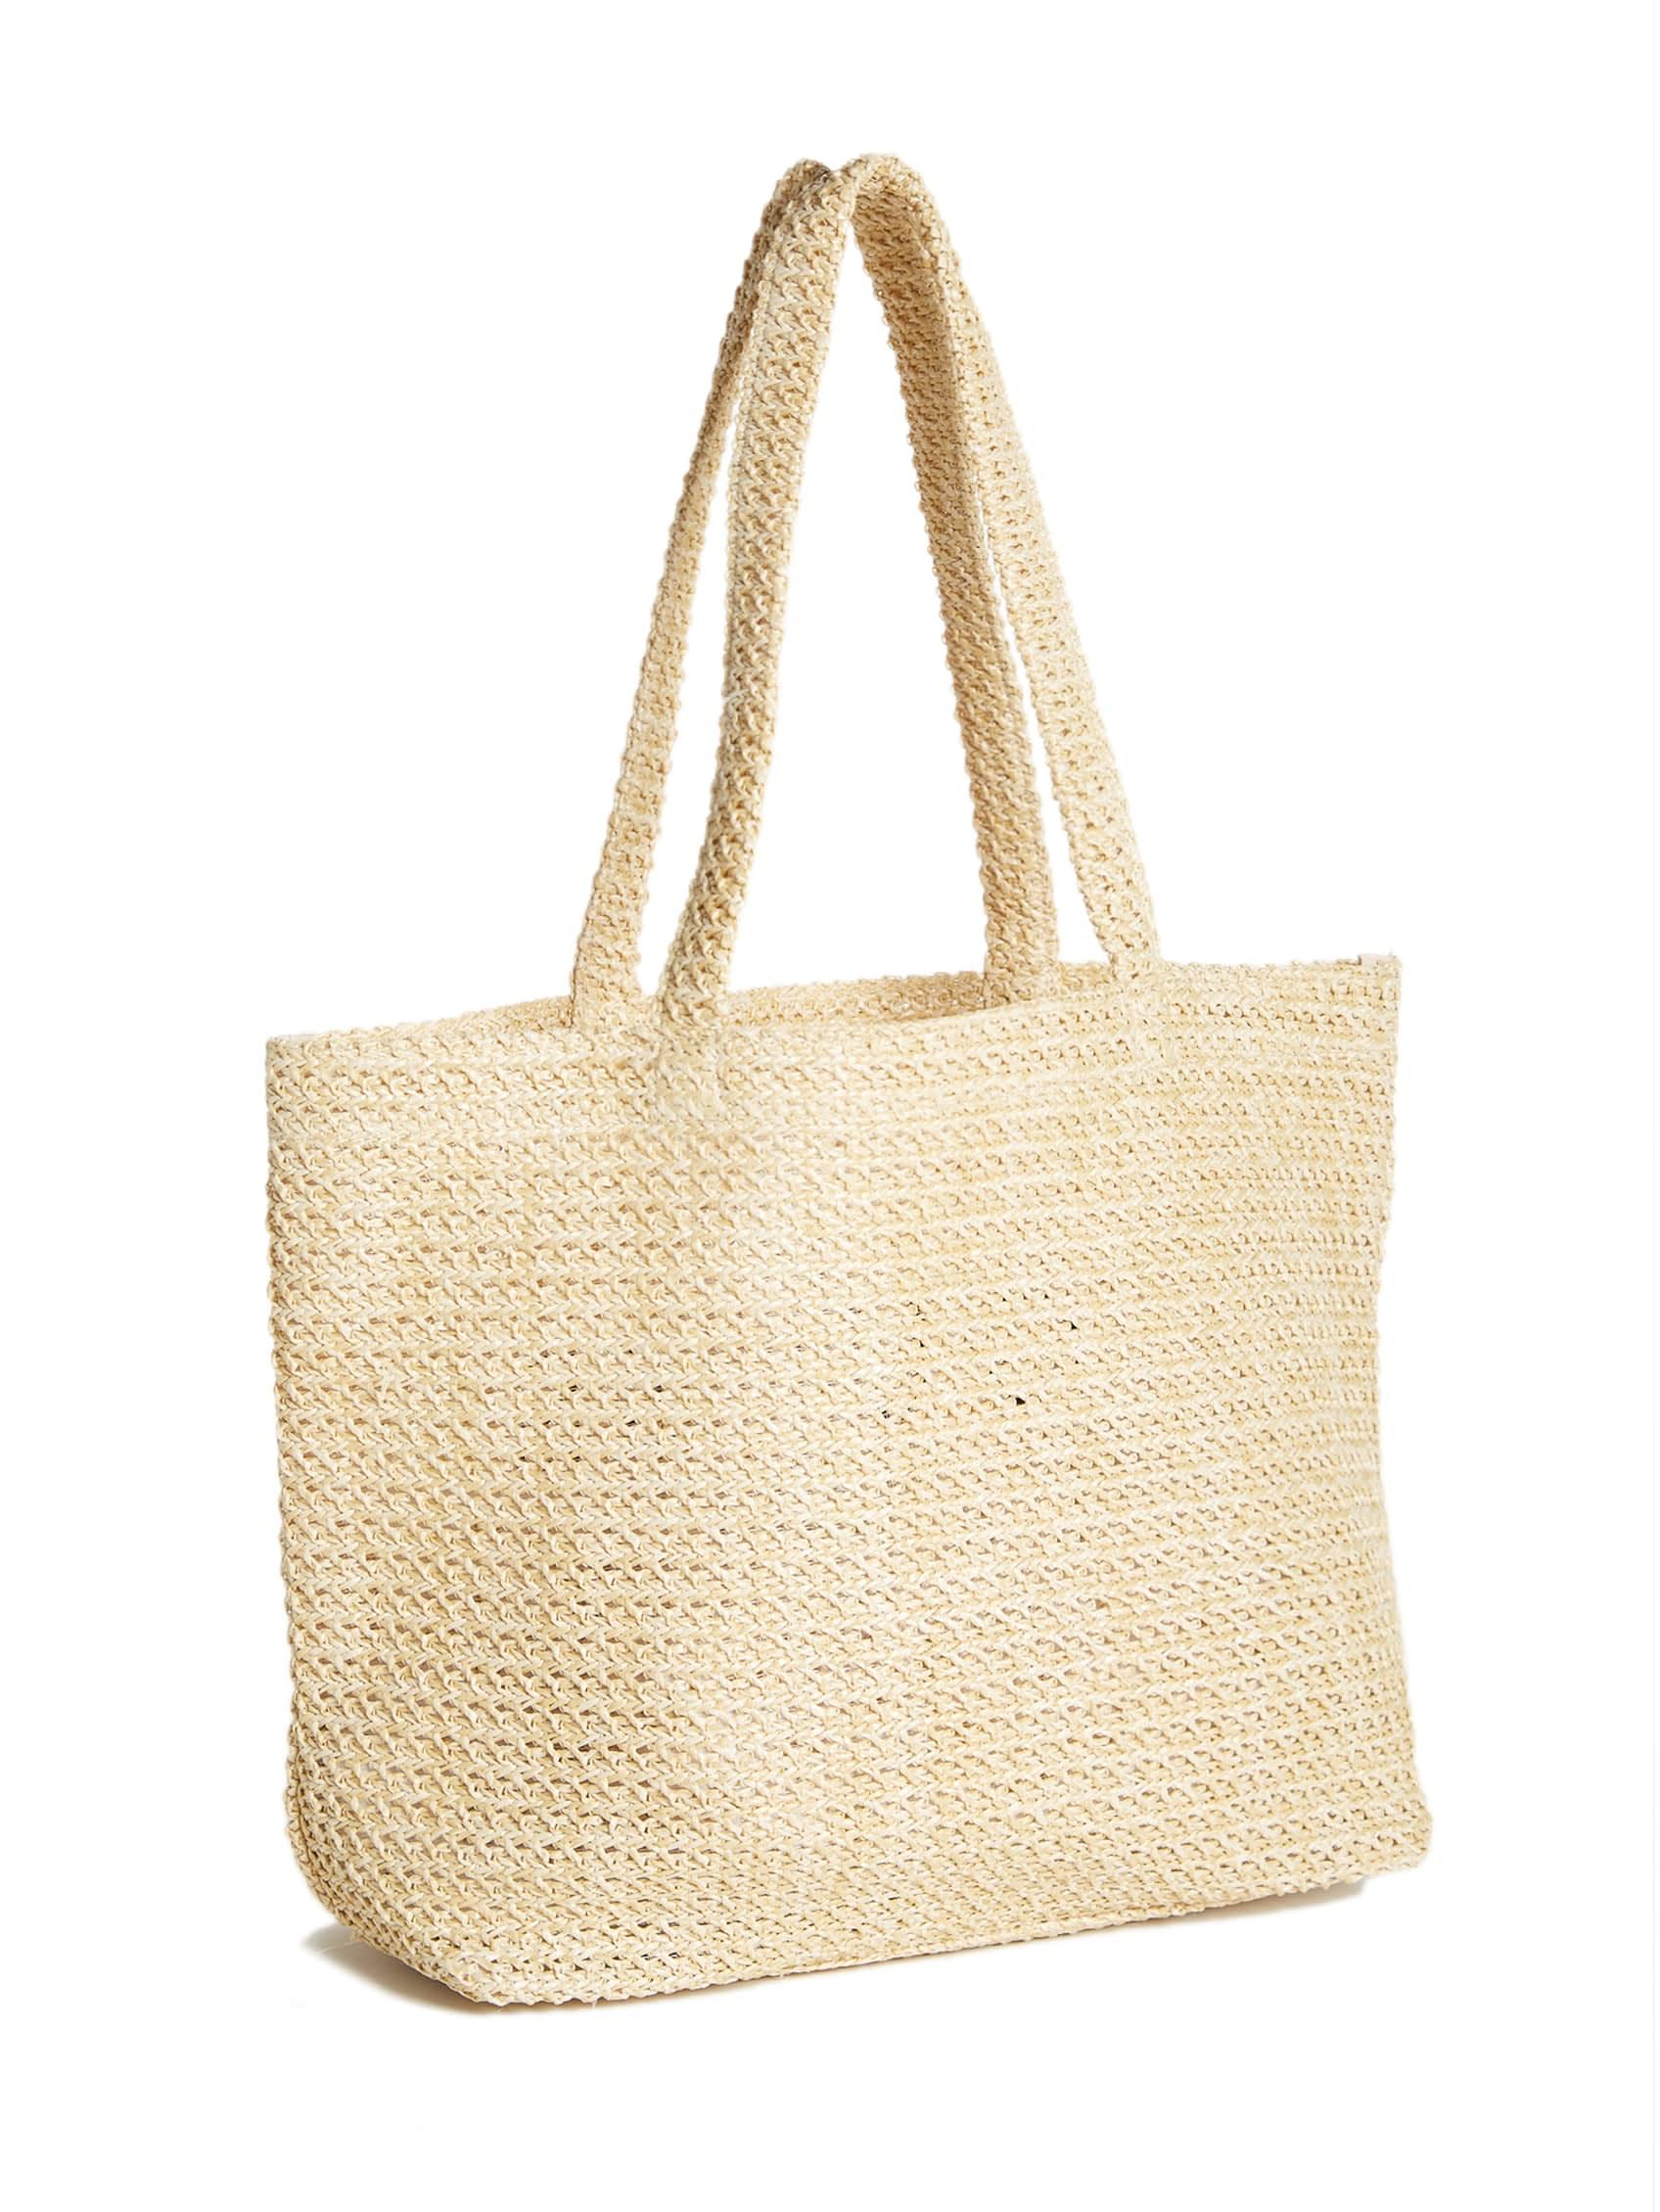 Guess Factory Embroidered Logo Woven Straw Tote in Natural | Lyst